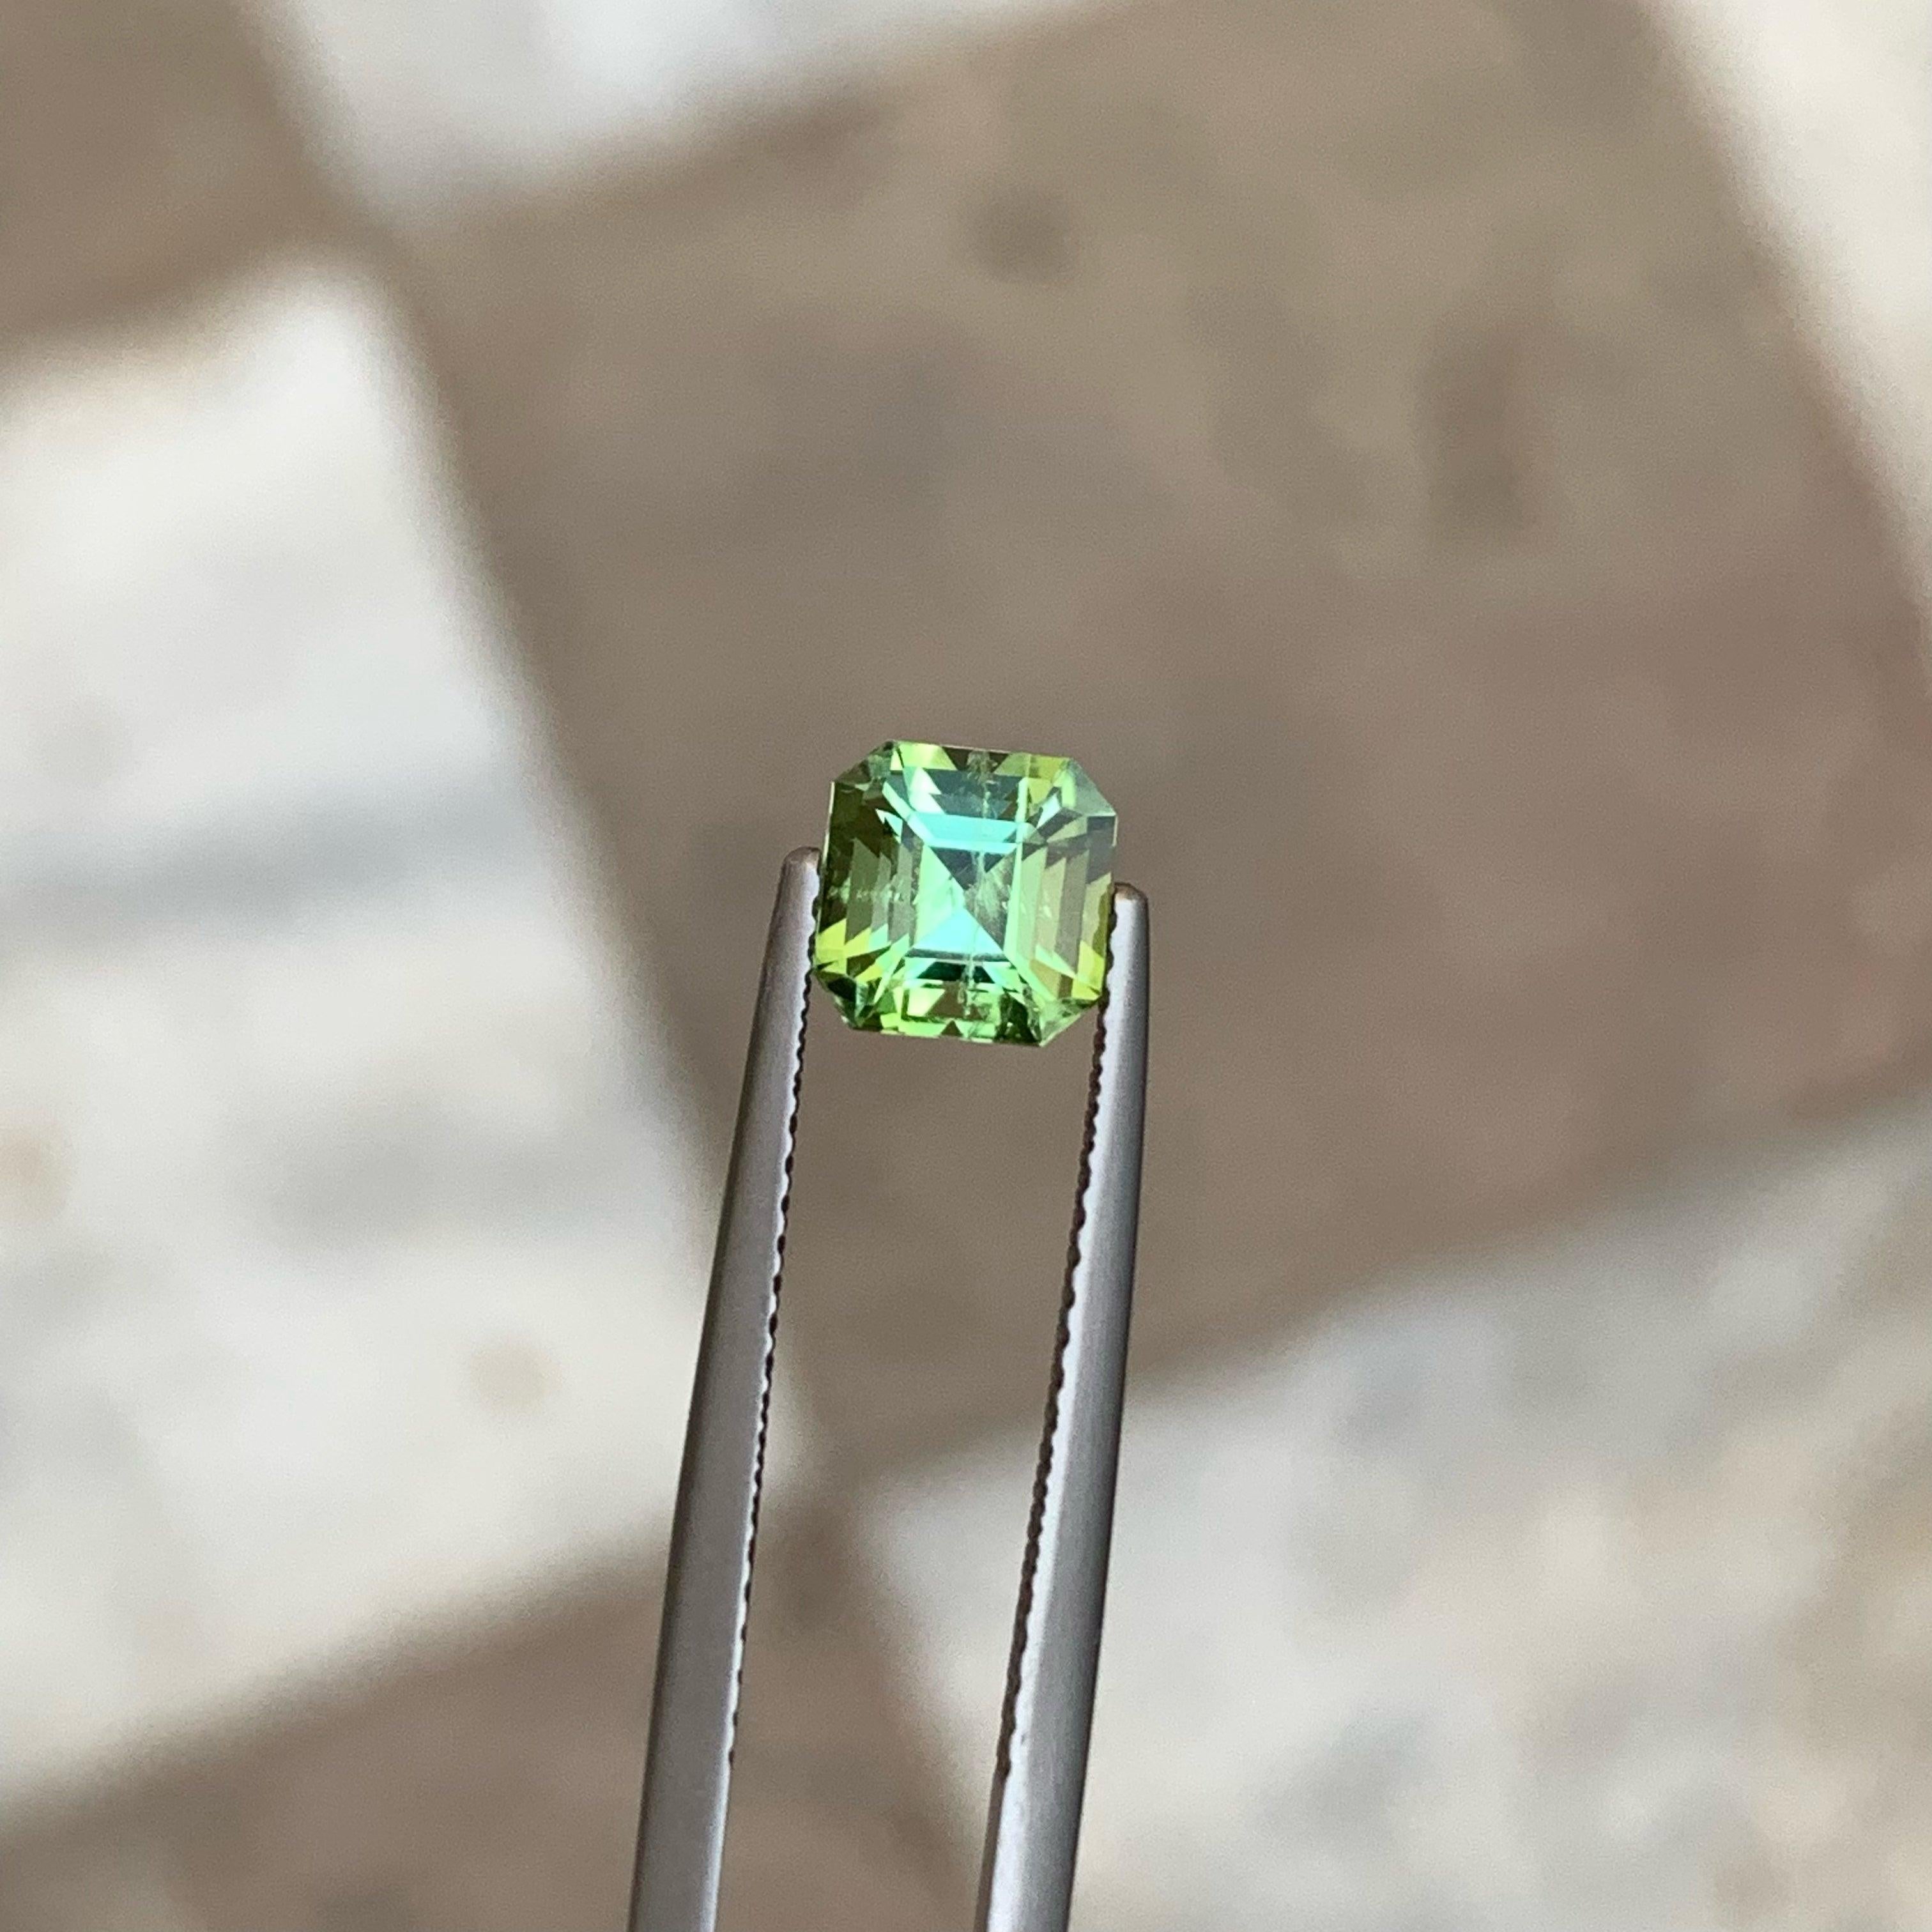 Beautiful Greenish Blue Tourmaline Stone of 1.25 carats from Afghanistan has a wonderful cut in a Octagon shape, incredible Greenish blue Color. Great brilliance. This gem is SI Clarity.

Product Information
GEMSTONE TYPE:	Beautiful Greenish Blue